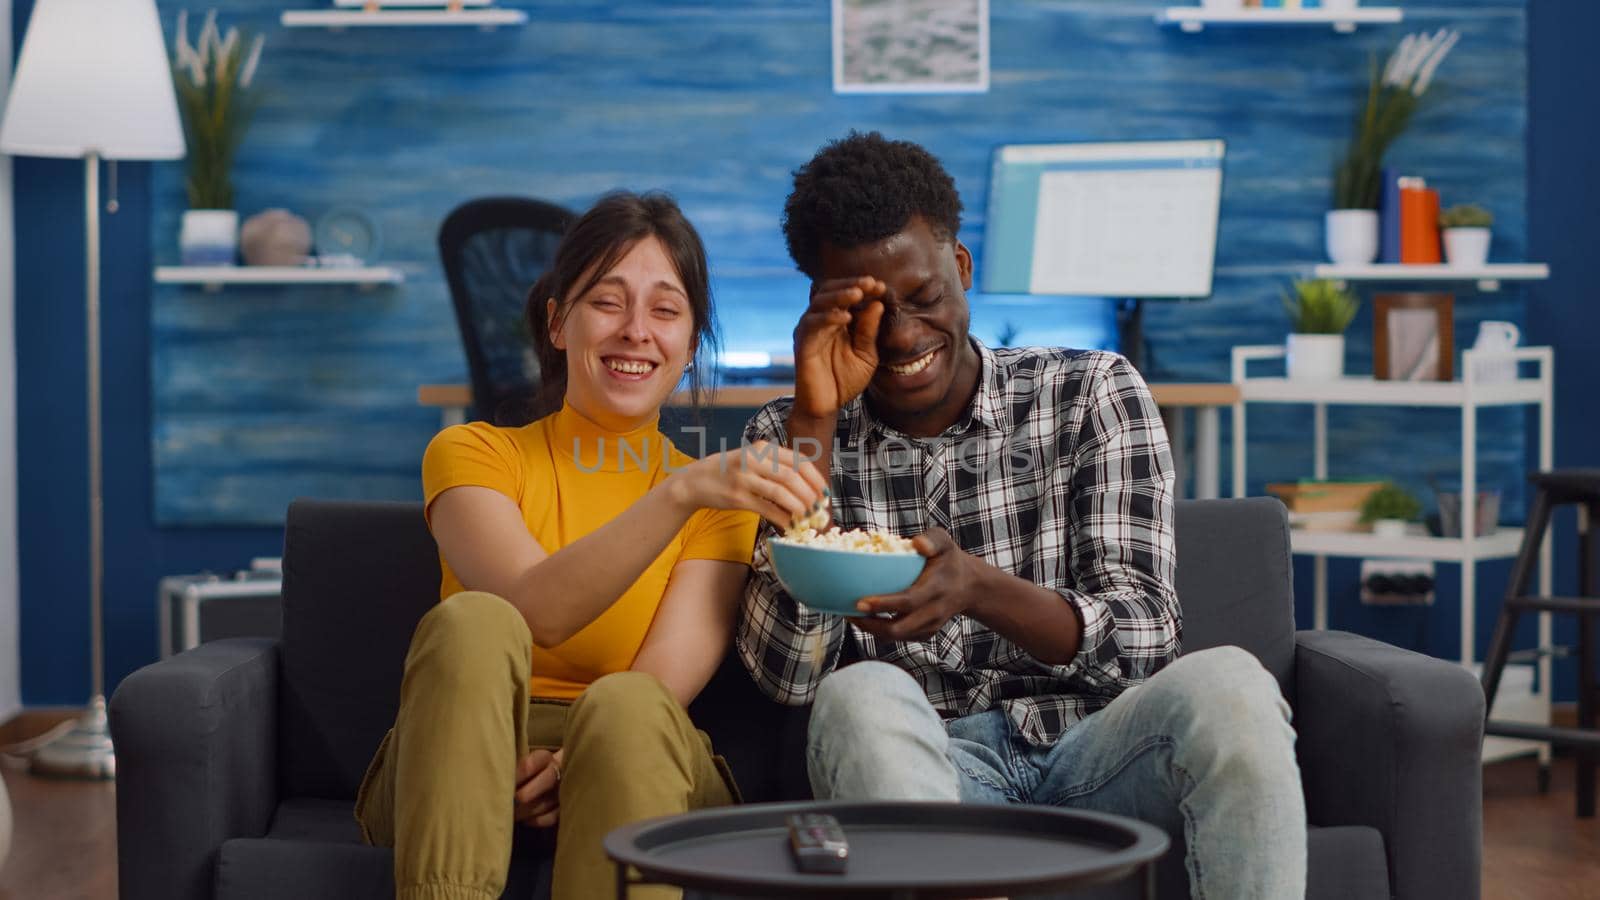 Cheerful interracial couple laughing at comedy on television by DCStudio